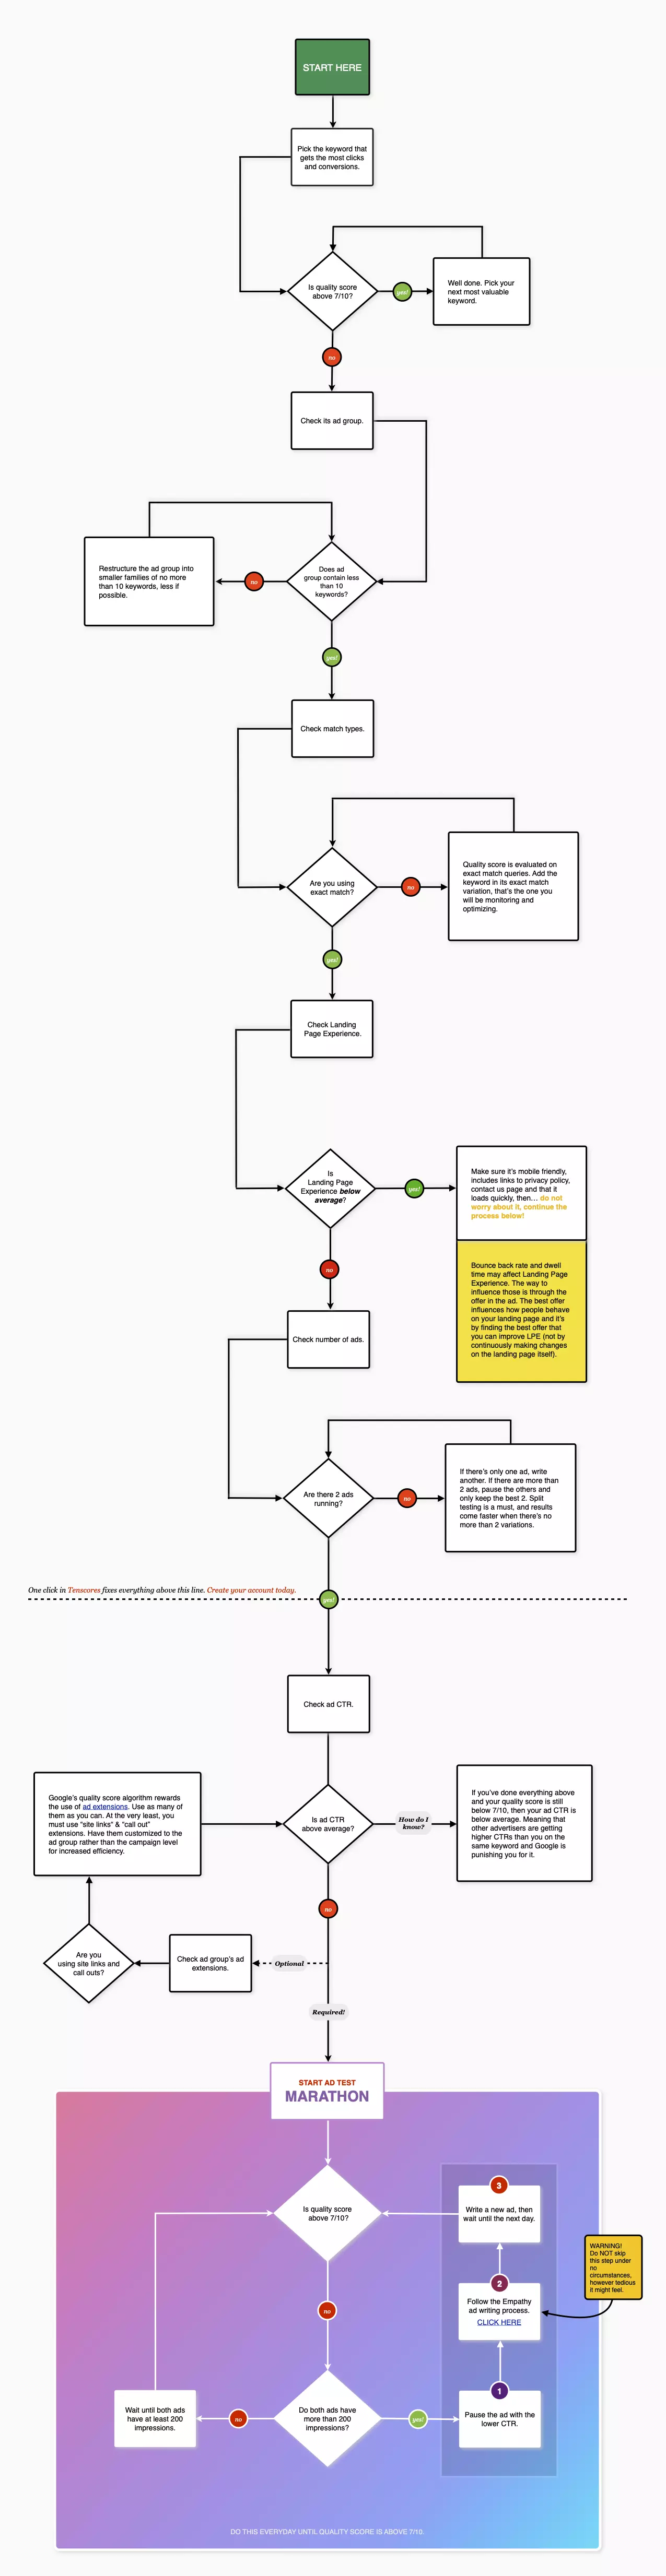 How to increase Quality Score - Flowchart